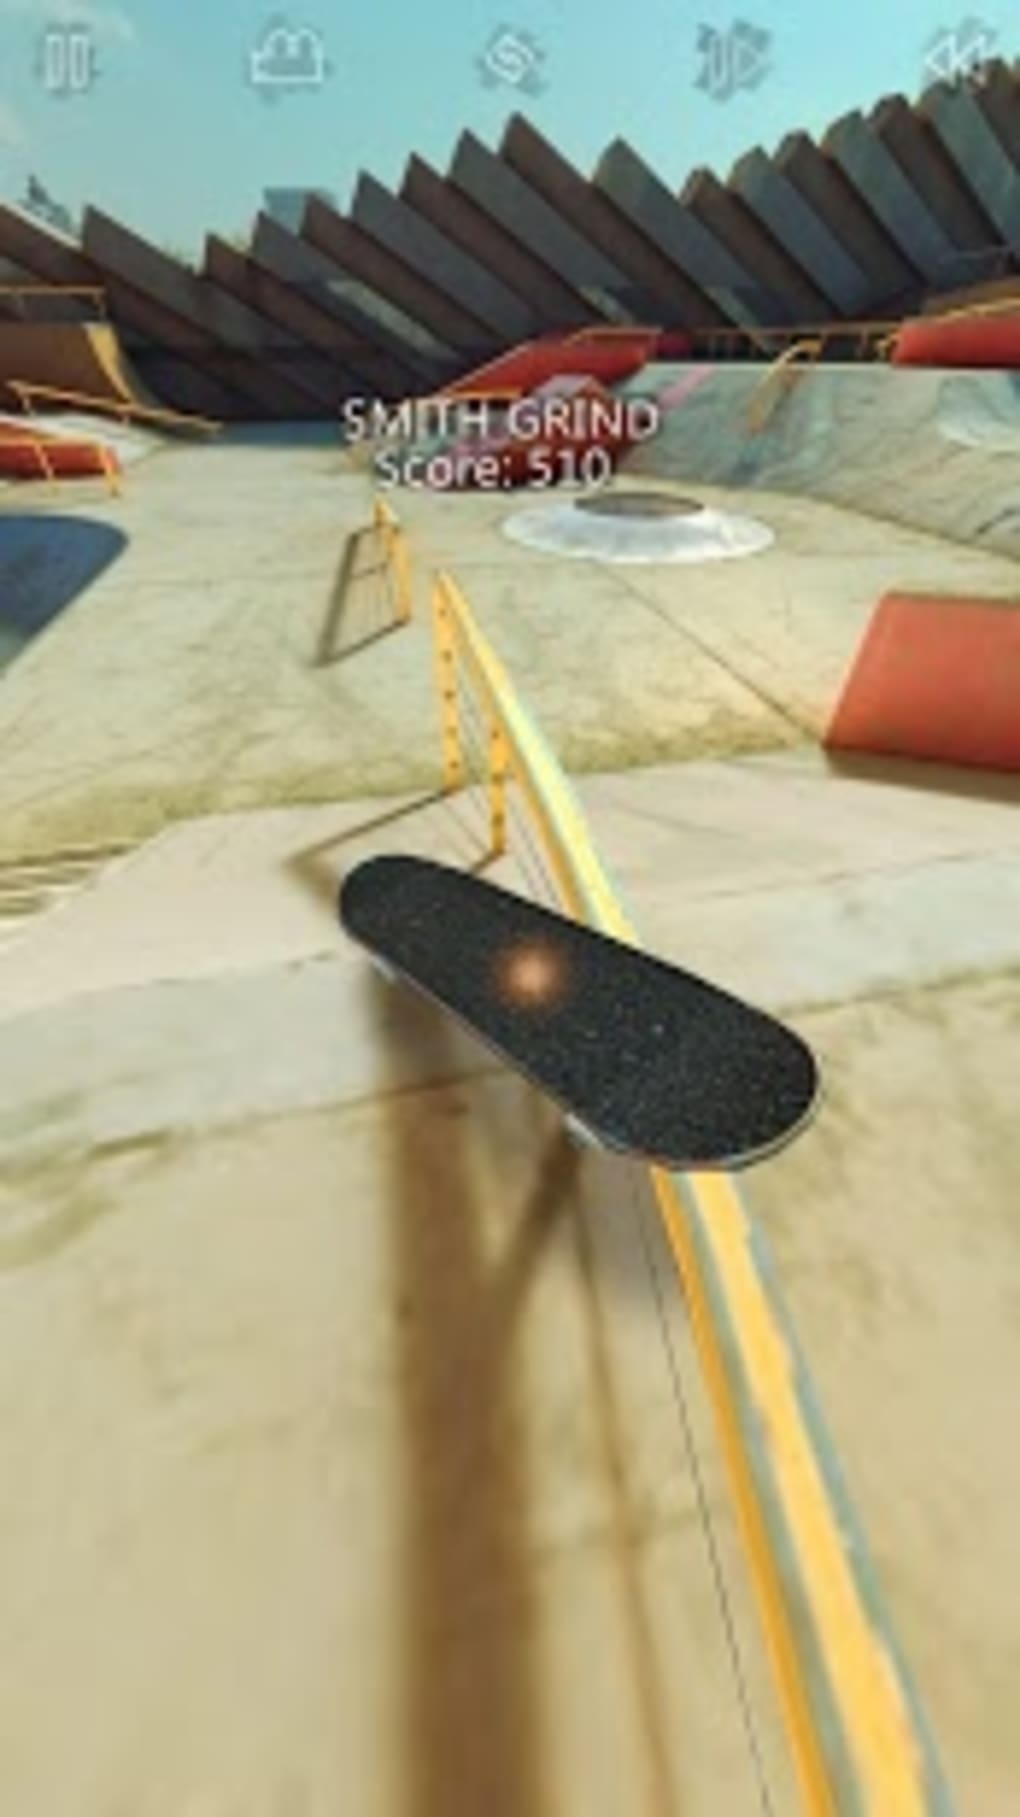 True Skate for Android - Download